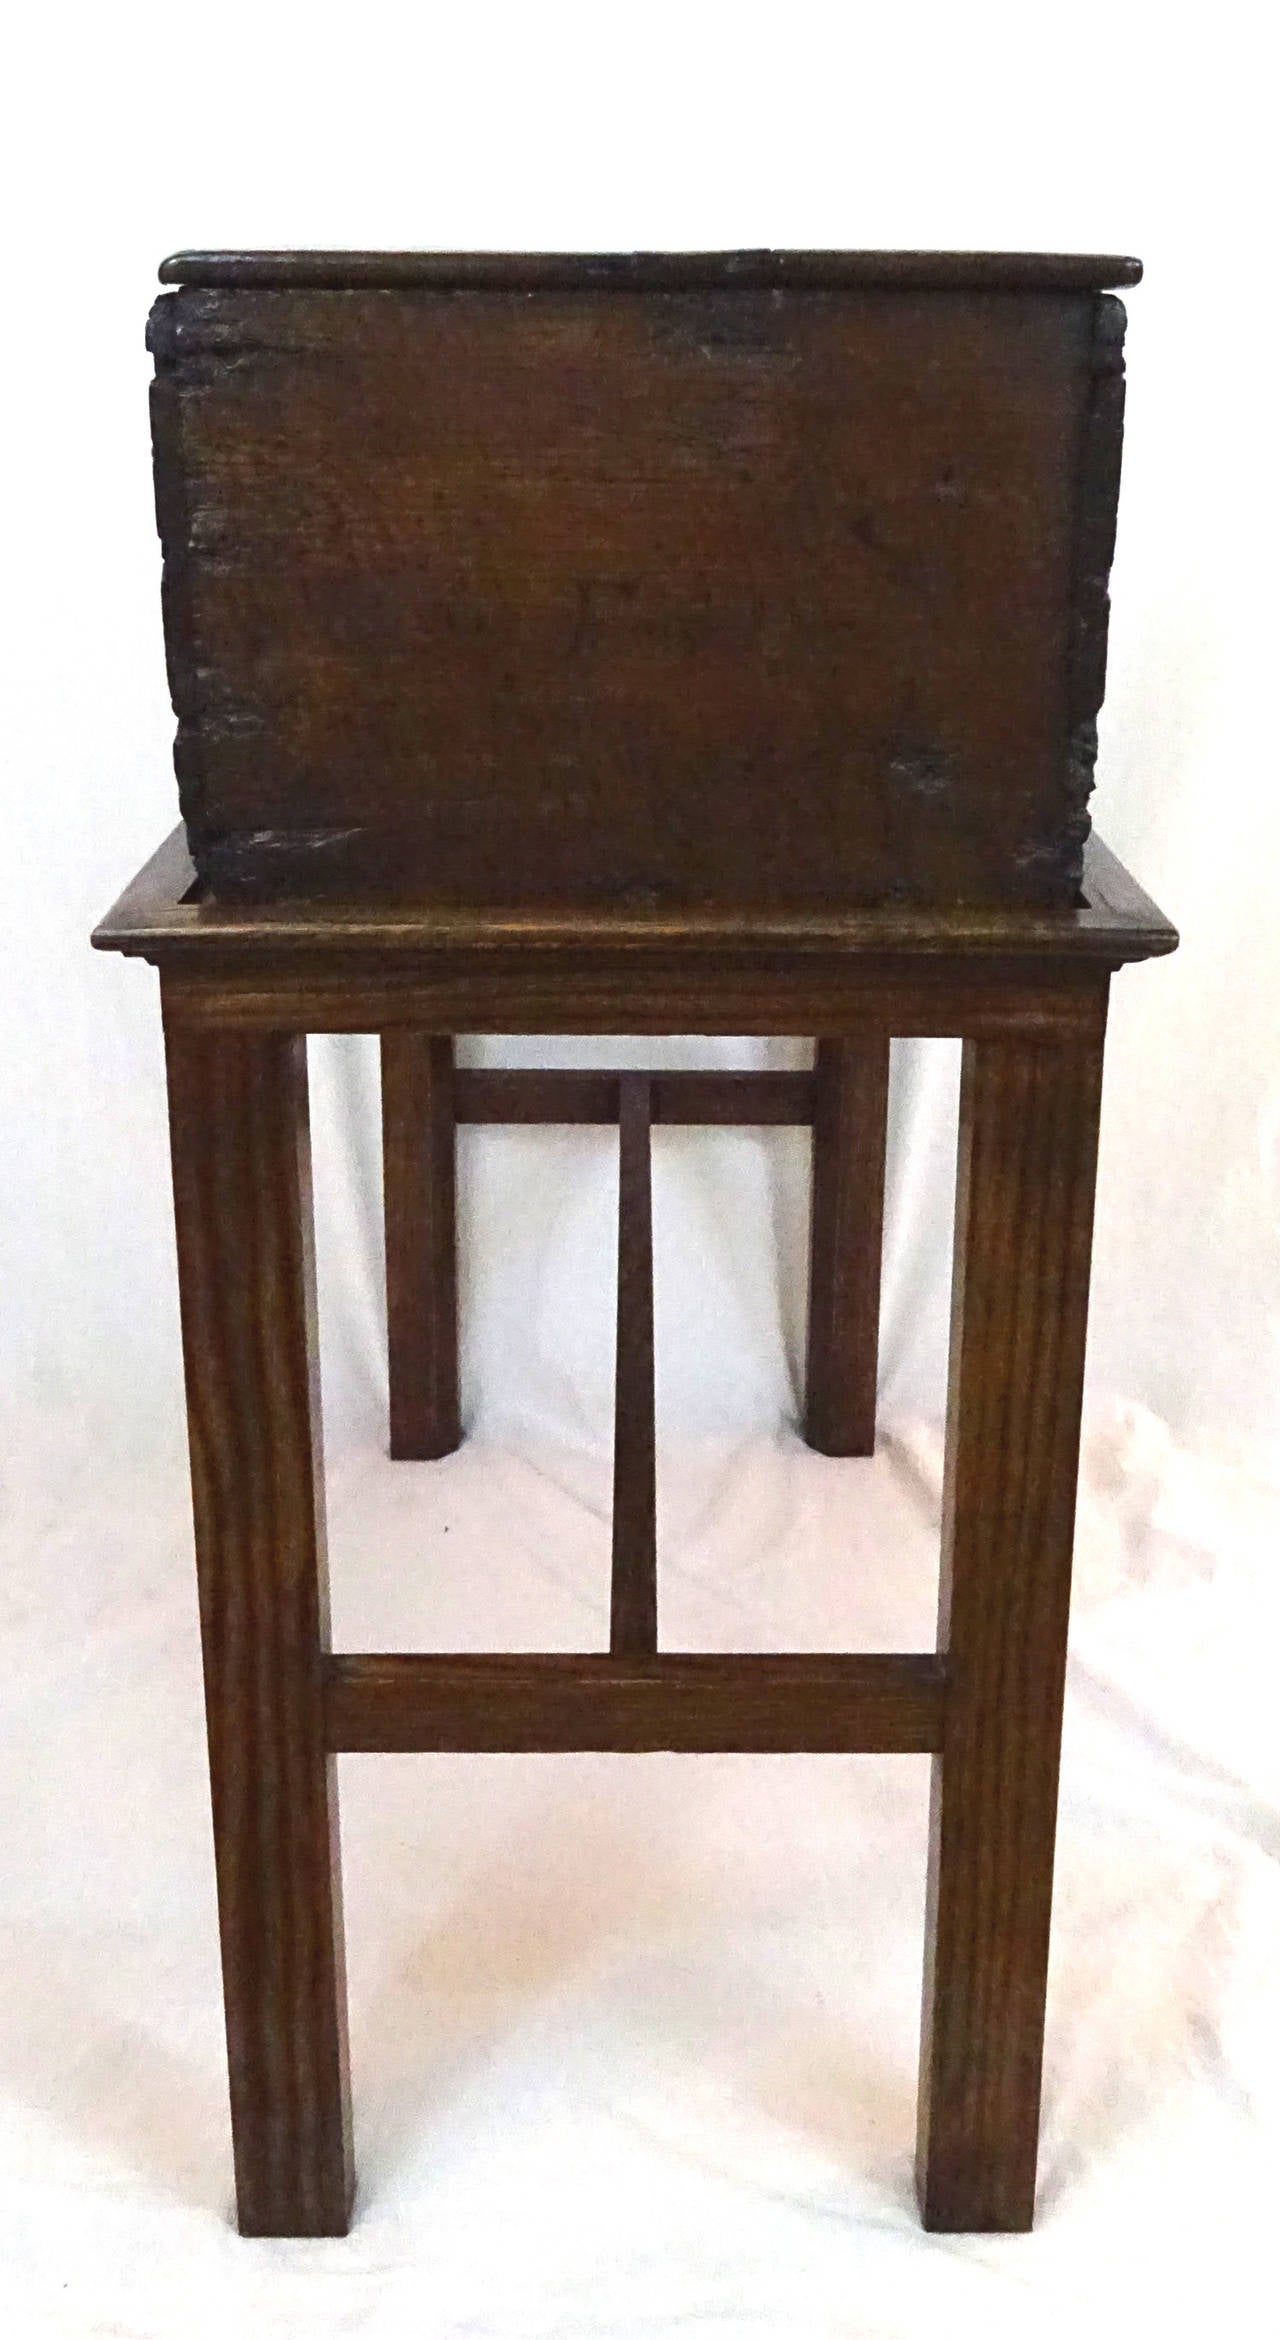 19th Century English Carved Wooden Box on Stand 5